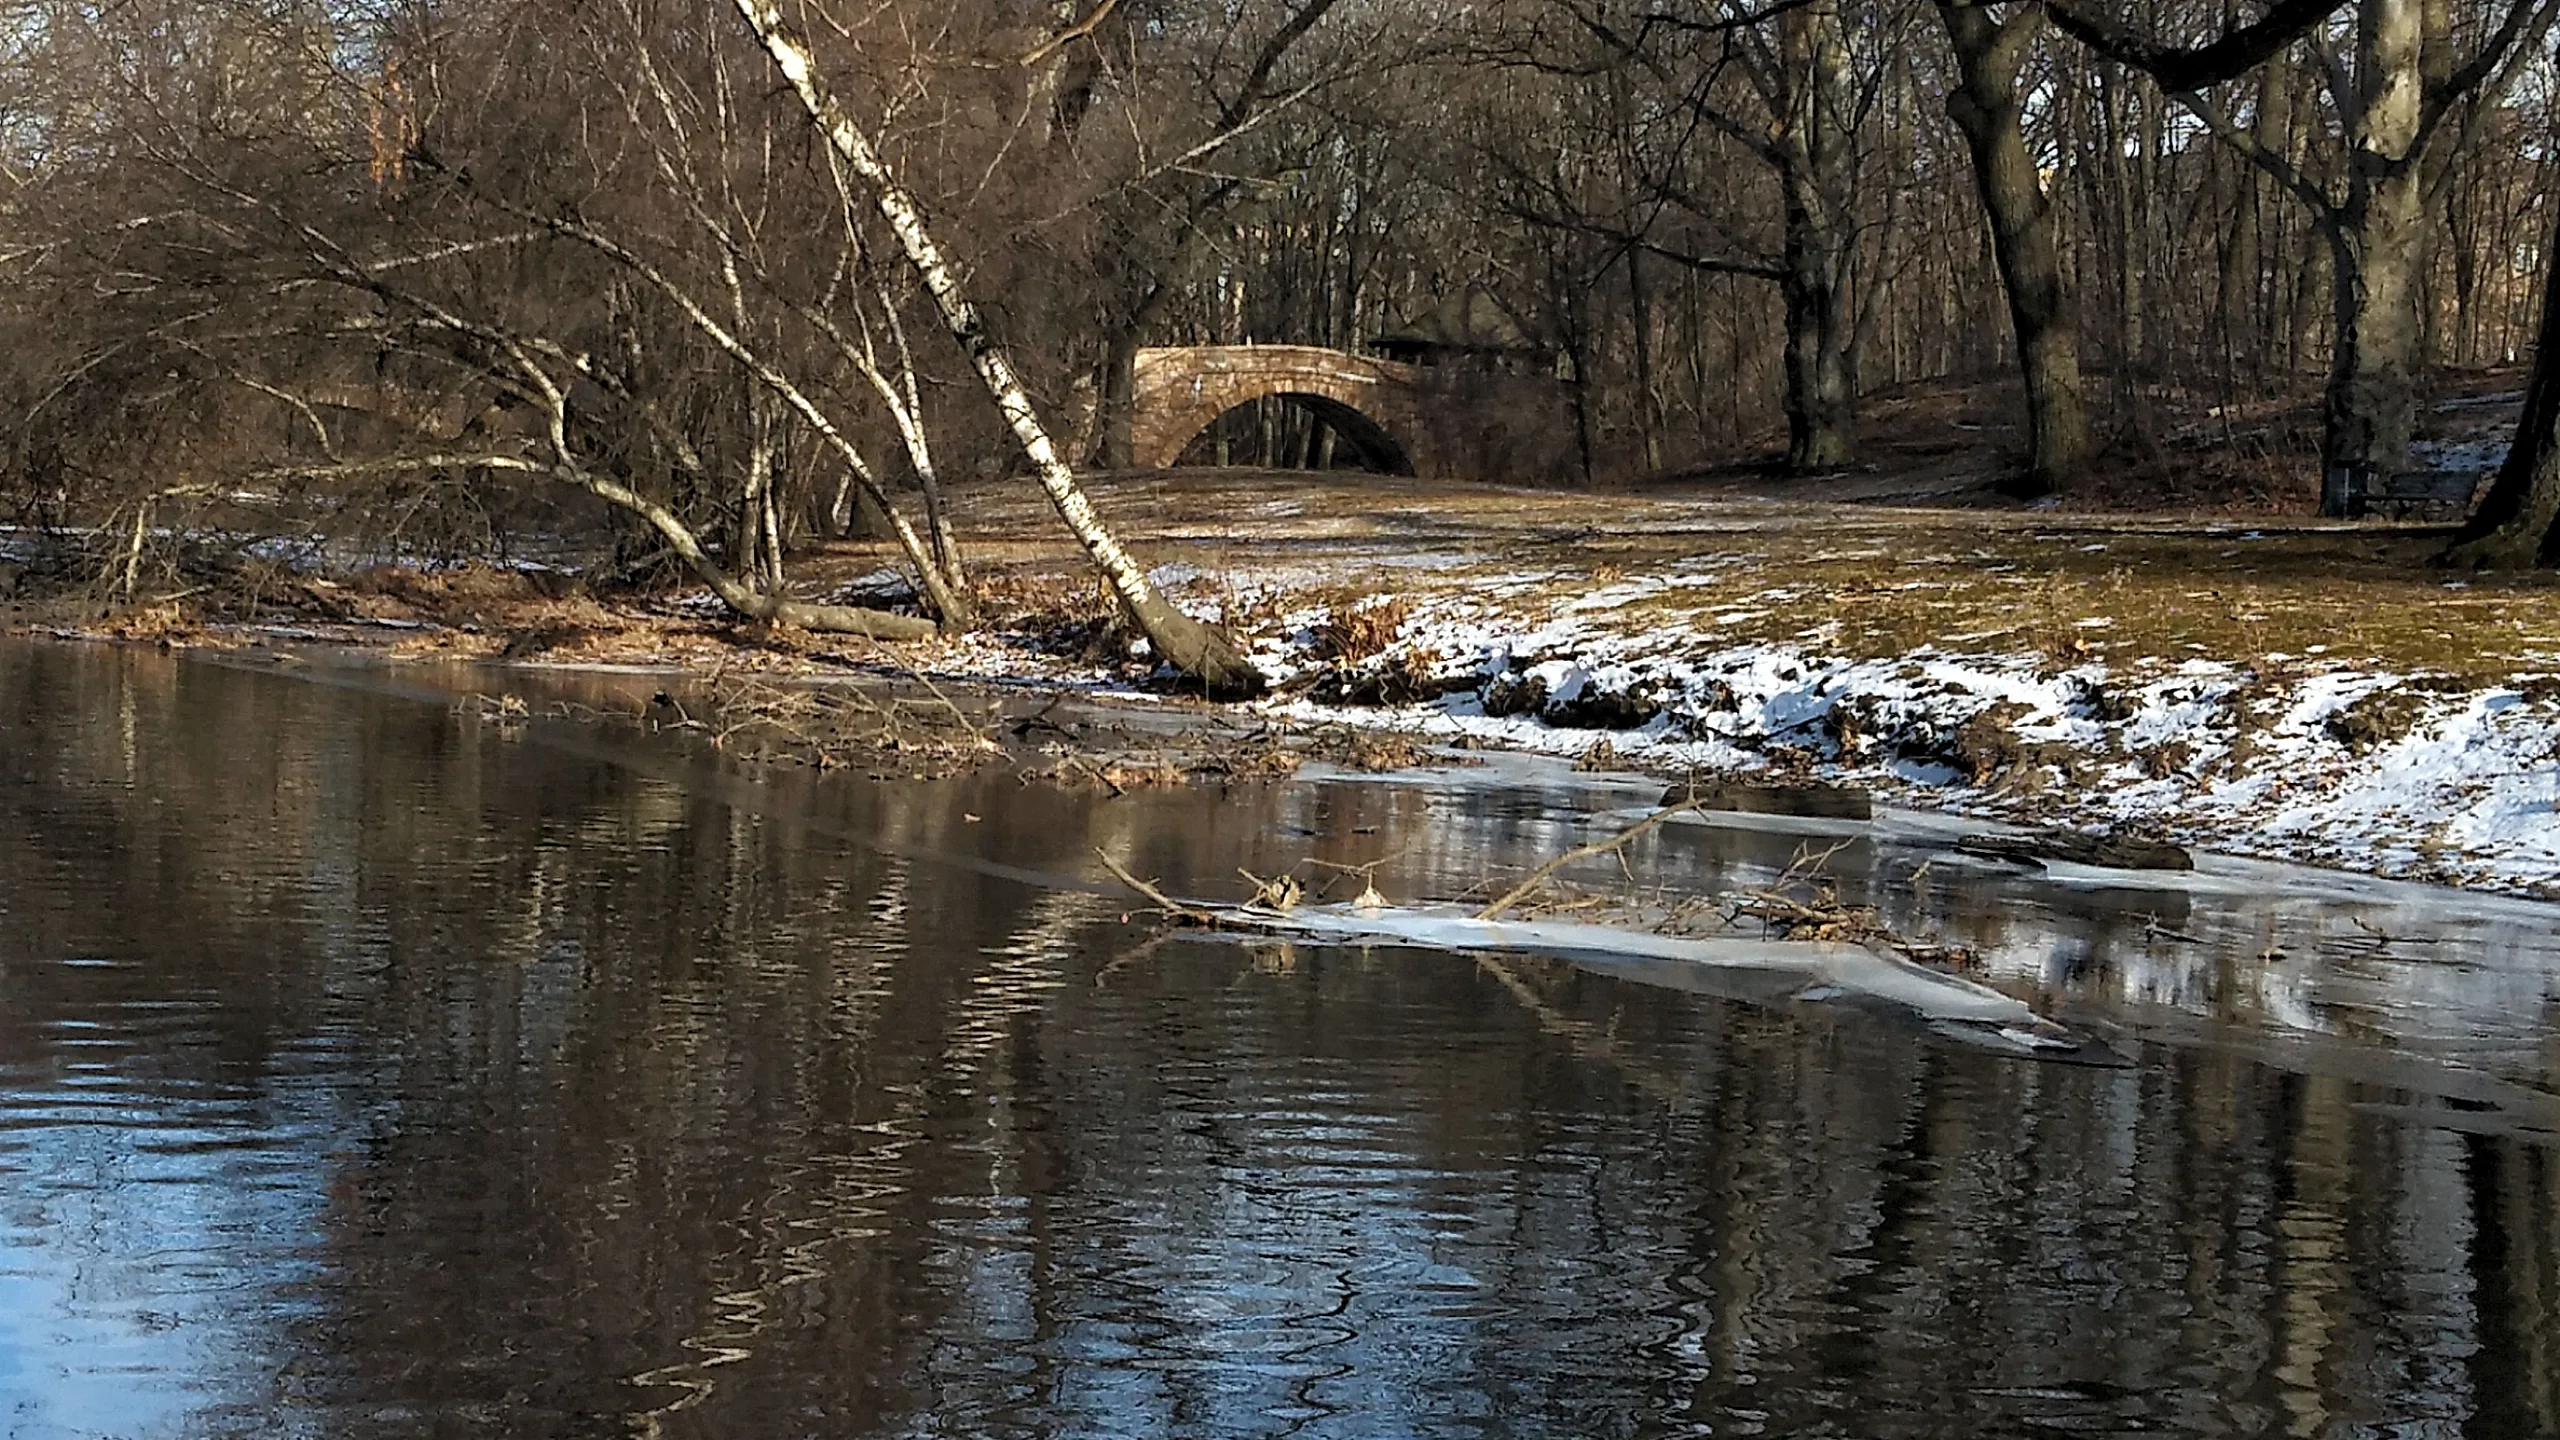 By Muddy River in Winter